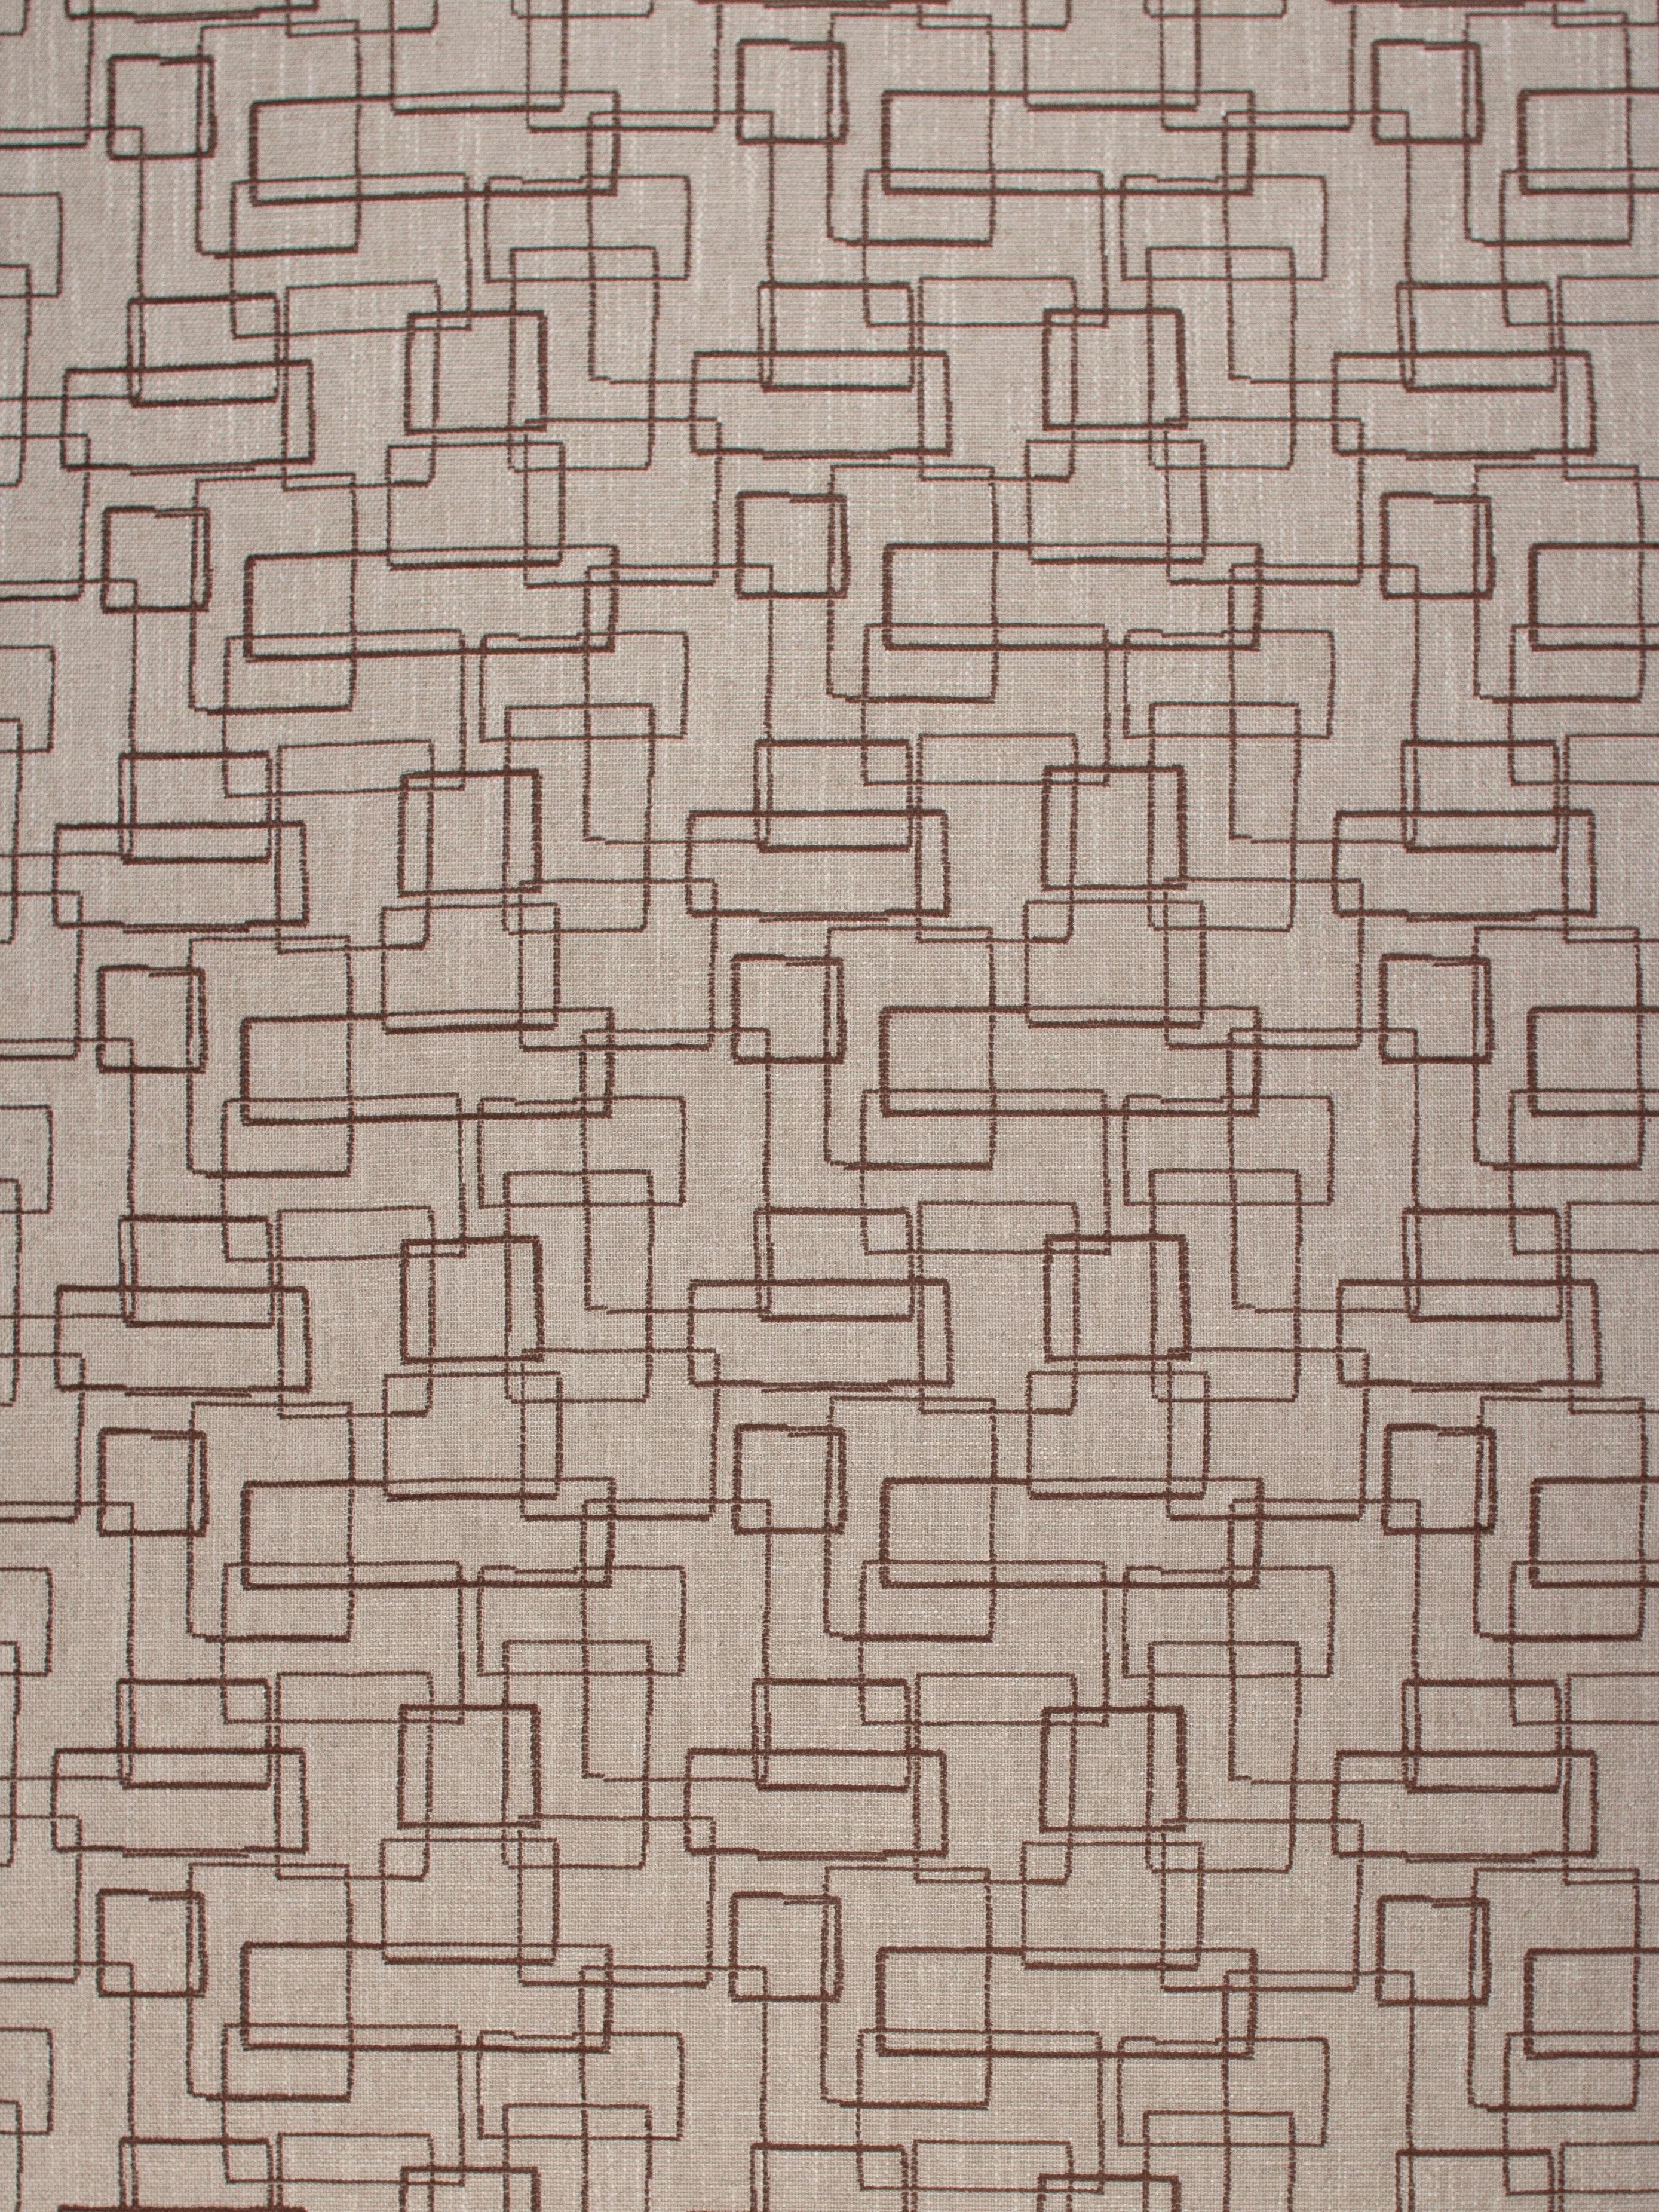 Neutra fabric in walnut color - pattern number BI 00700001 - by Scalamandre in the Old World Weavers collection